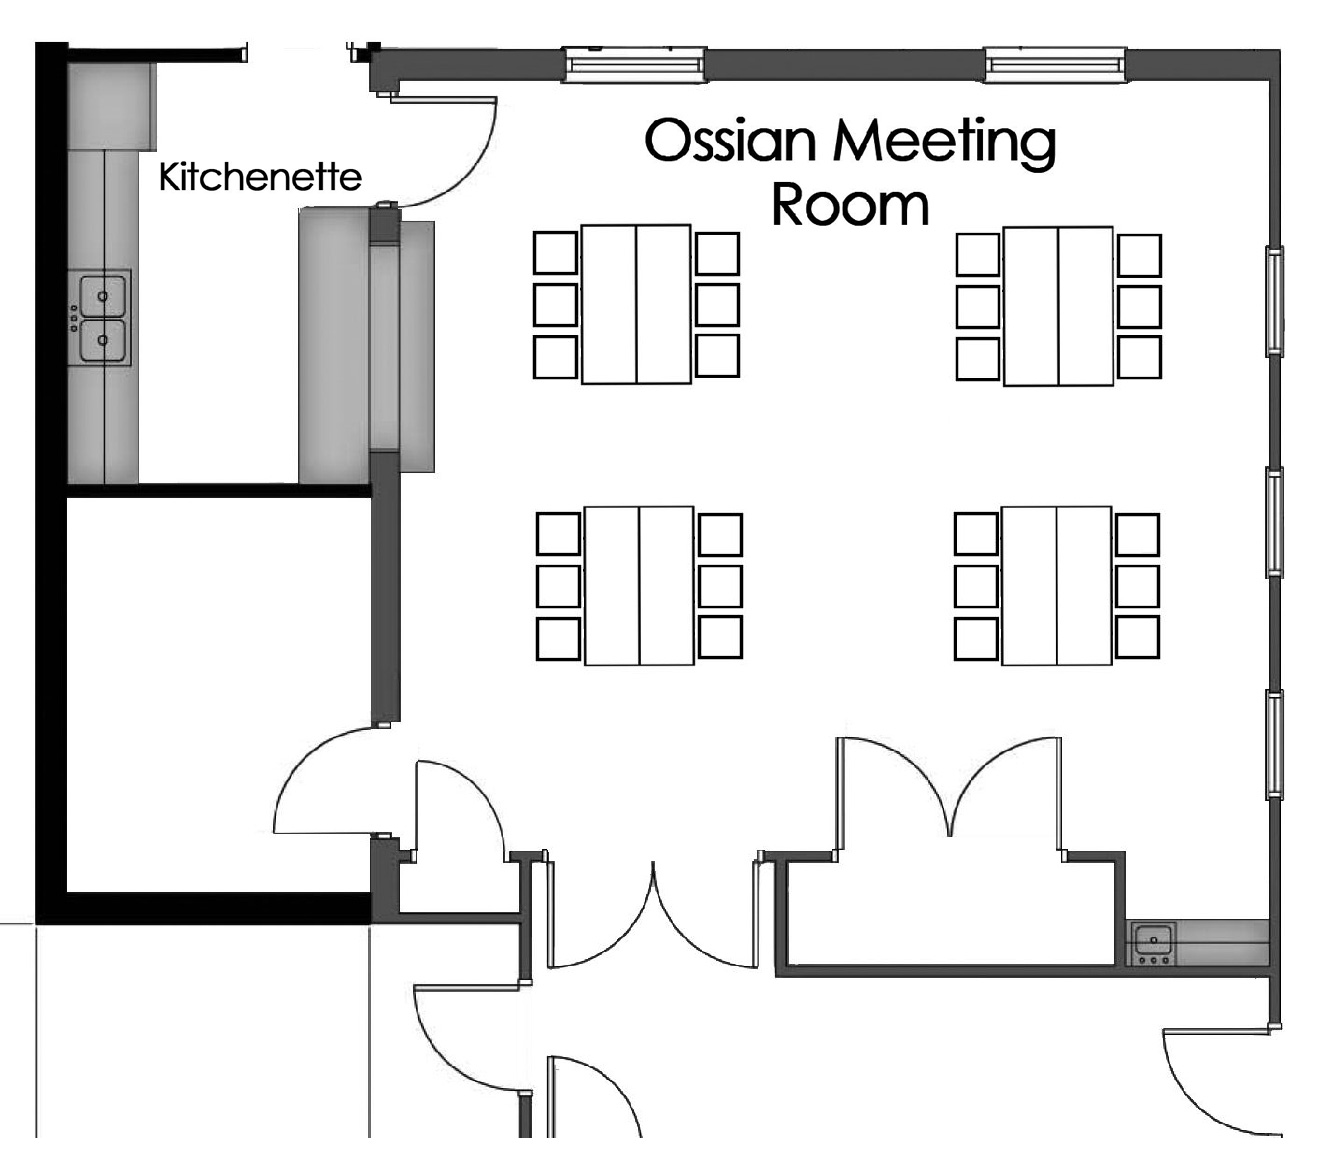 ossian meeting rooms